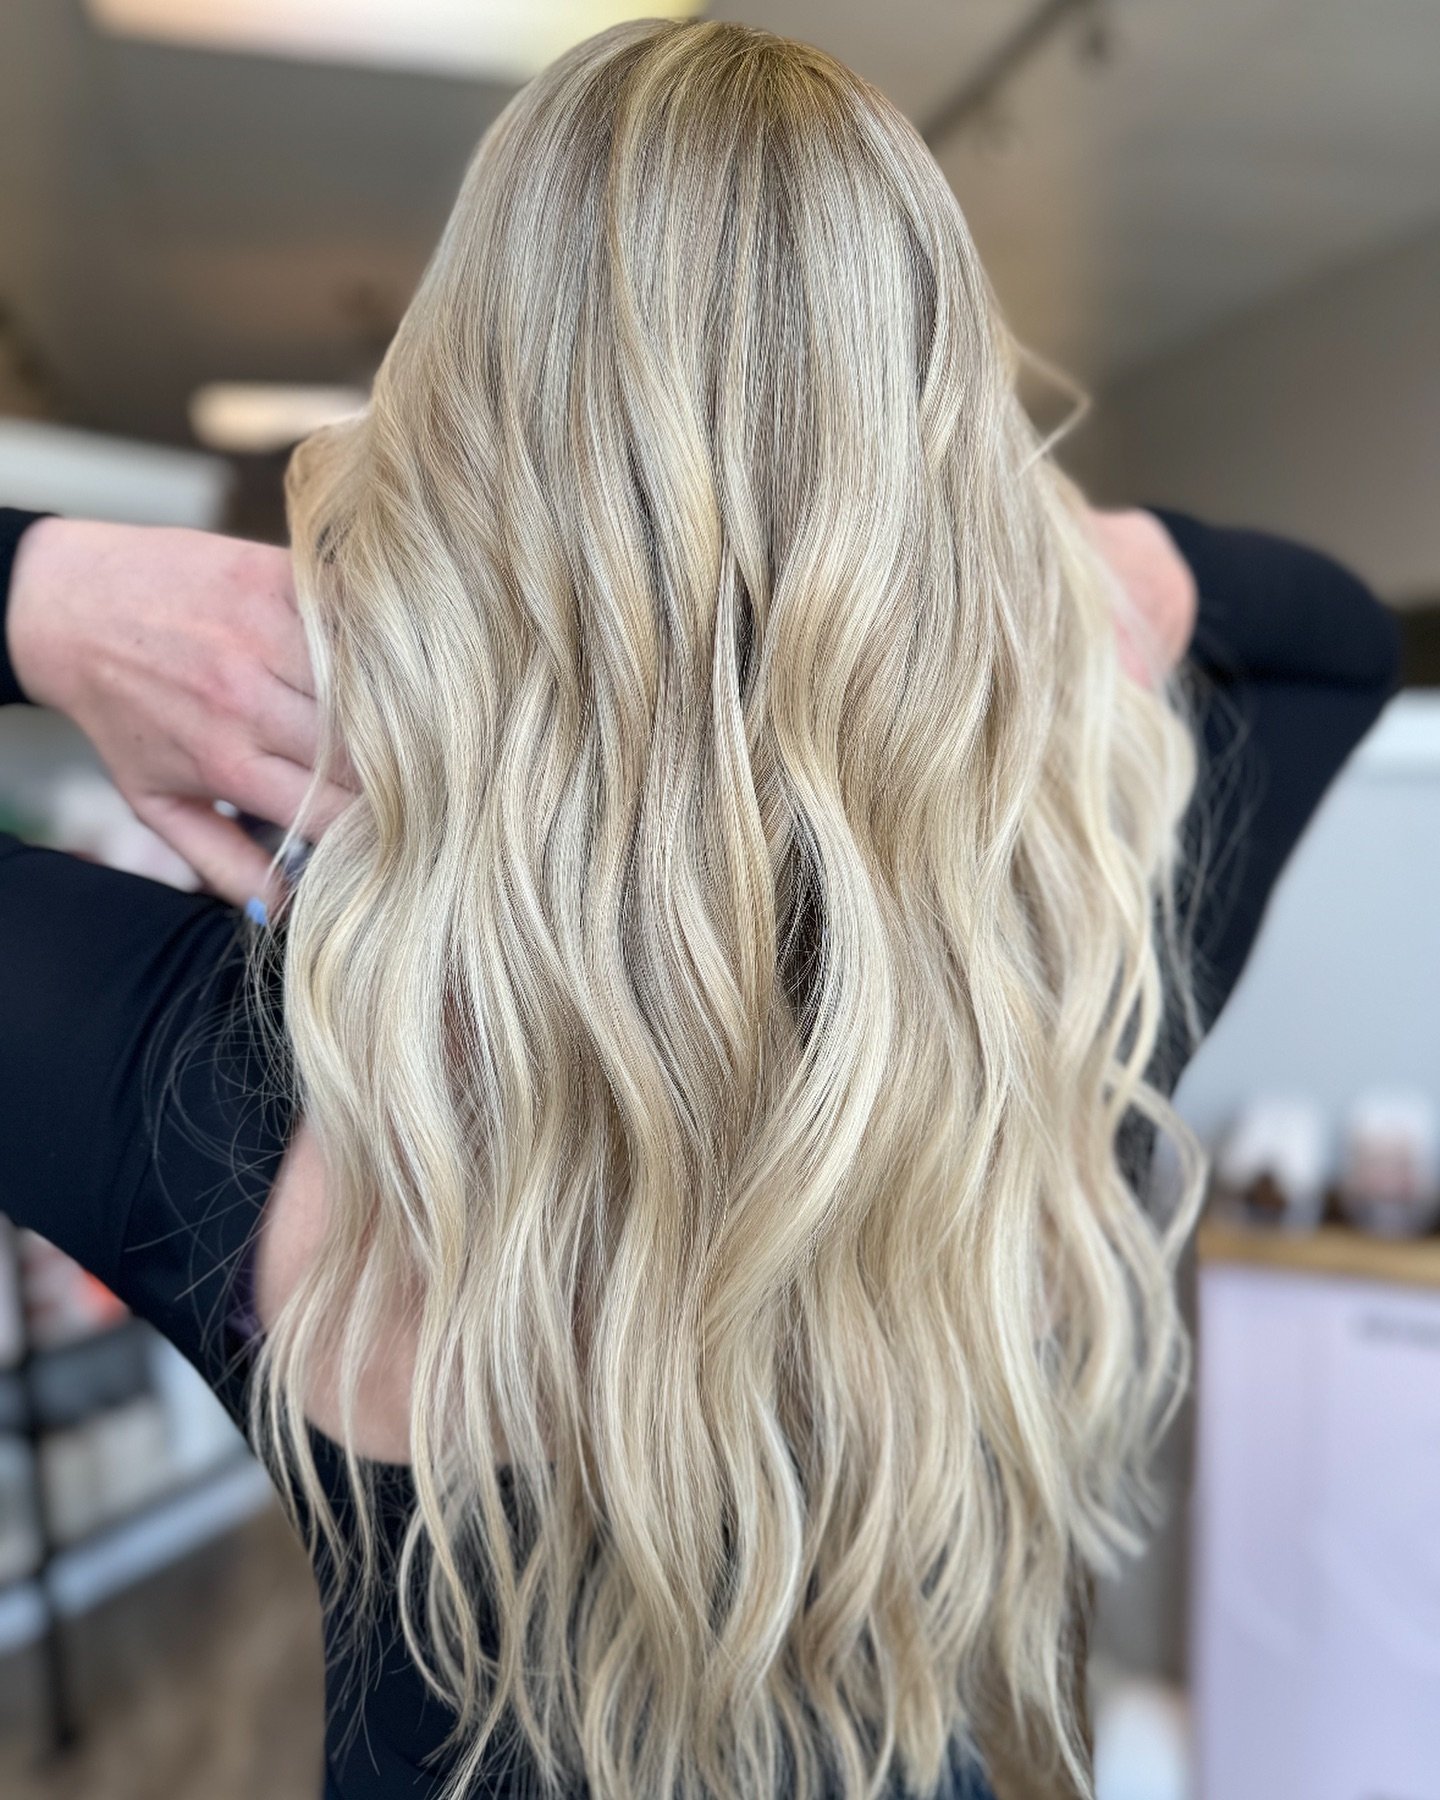 Swooning over this hair! 💛 
Hair by @hairwithnicoler